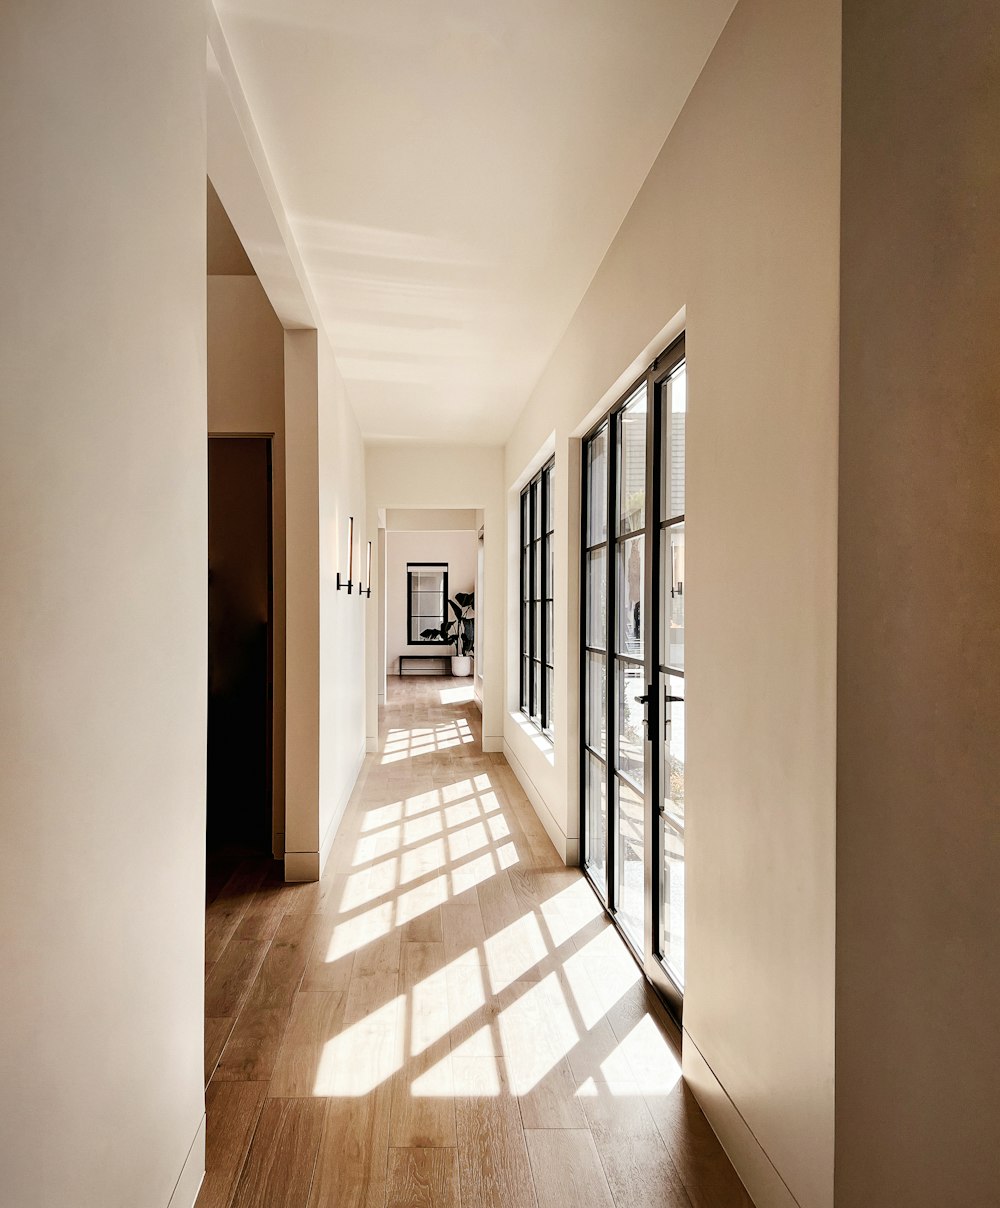 a long hallway with large windows and wooden floors